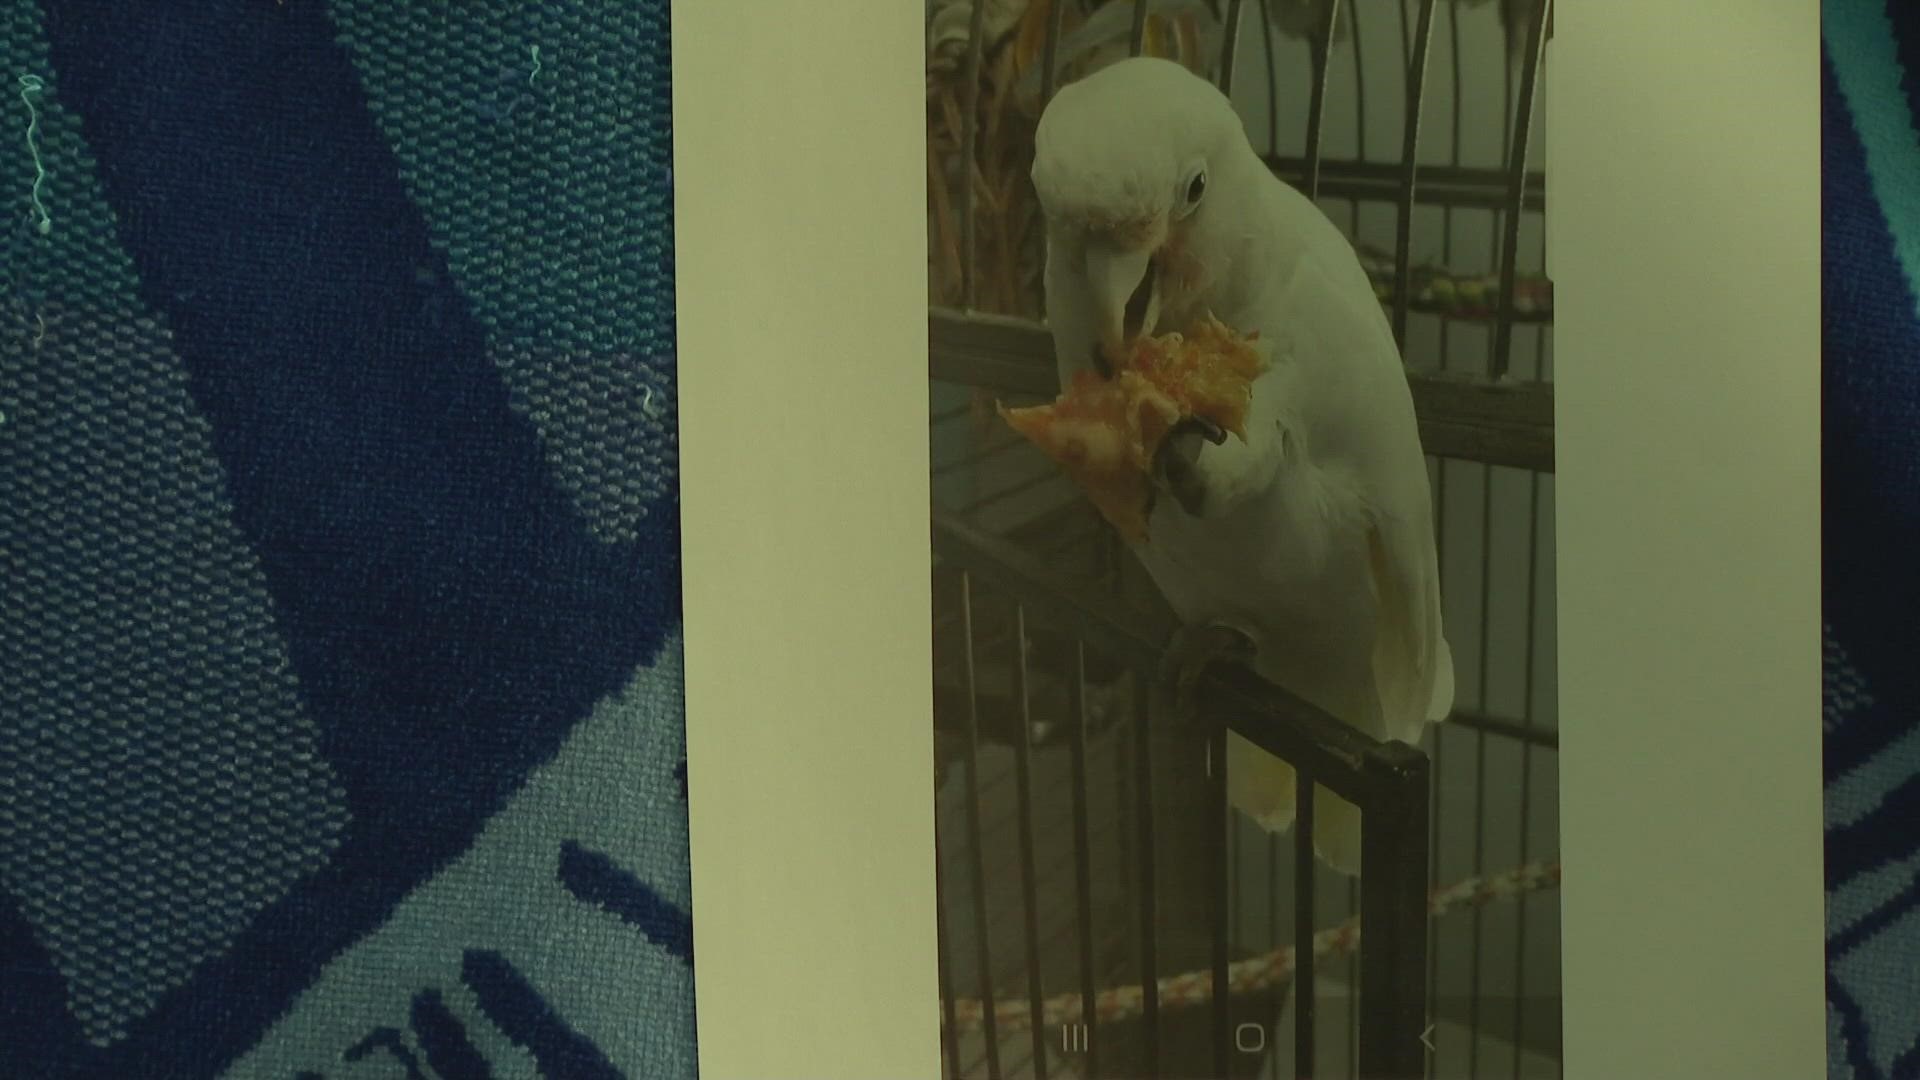 The owners of a fish store in Highlands Ranch are hoping that someone will bring back their pet cockatoo. 9NEWS reporter Jaleesa Irizarry shares their story.